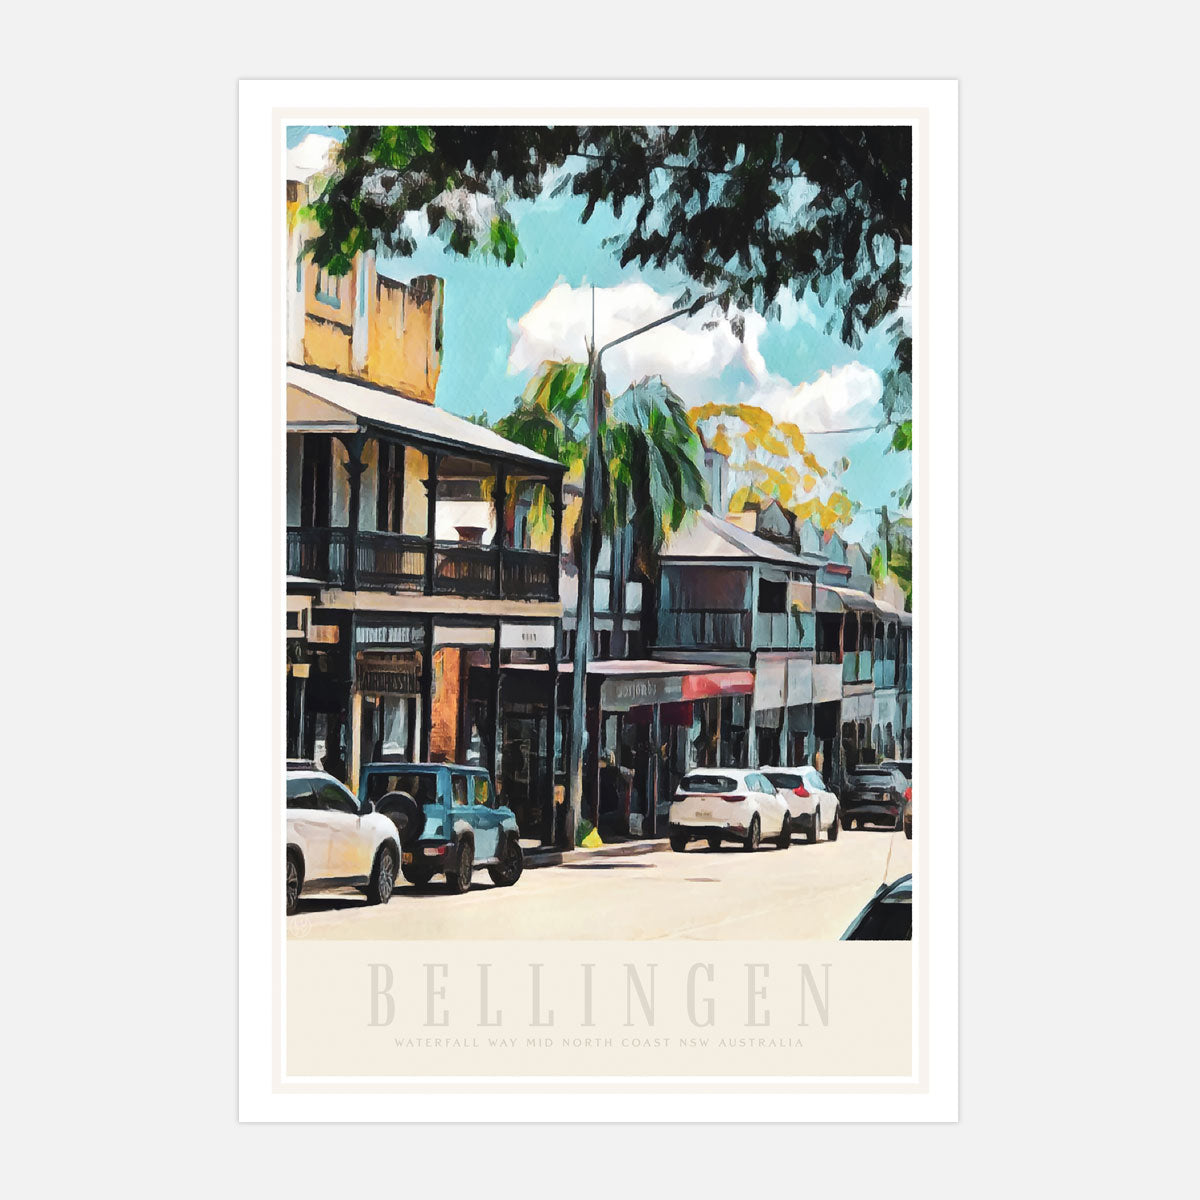 Bellingen vintage retro travel print from Places We Luv